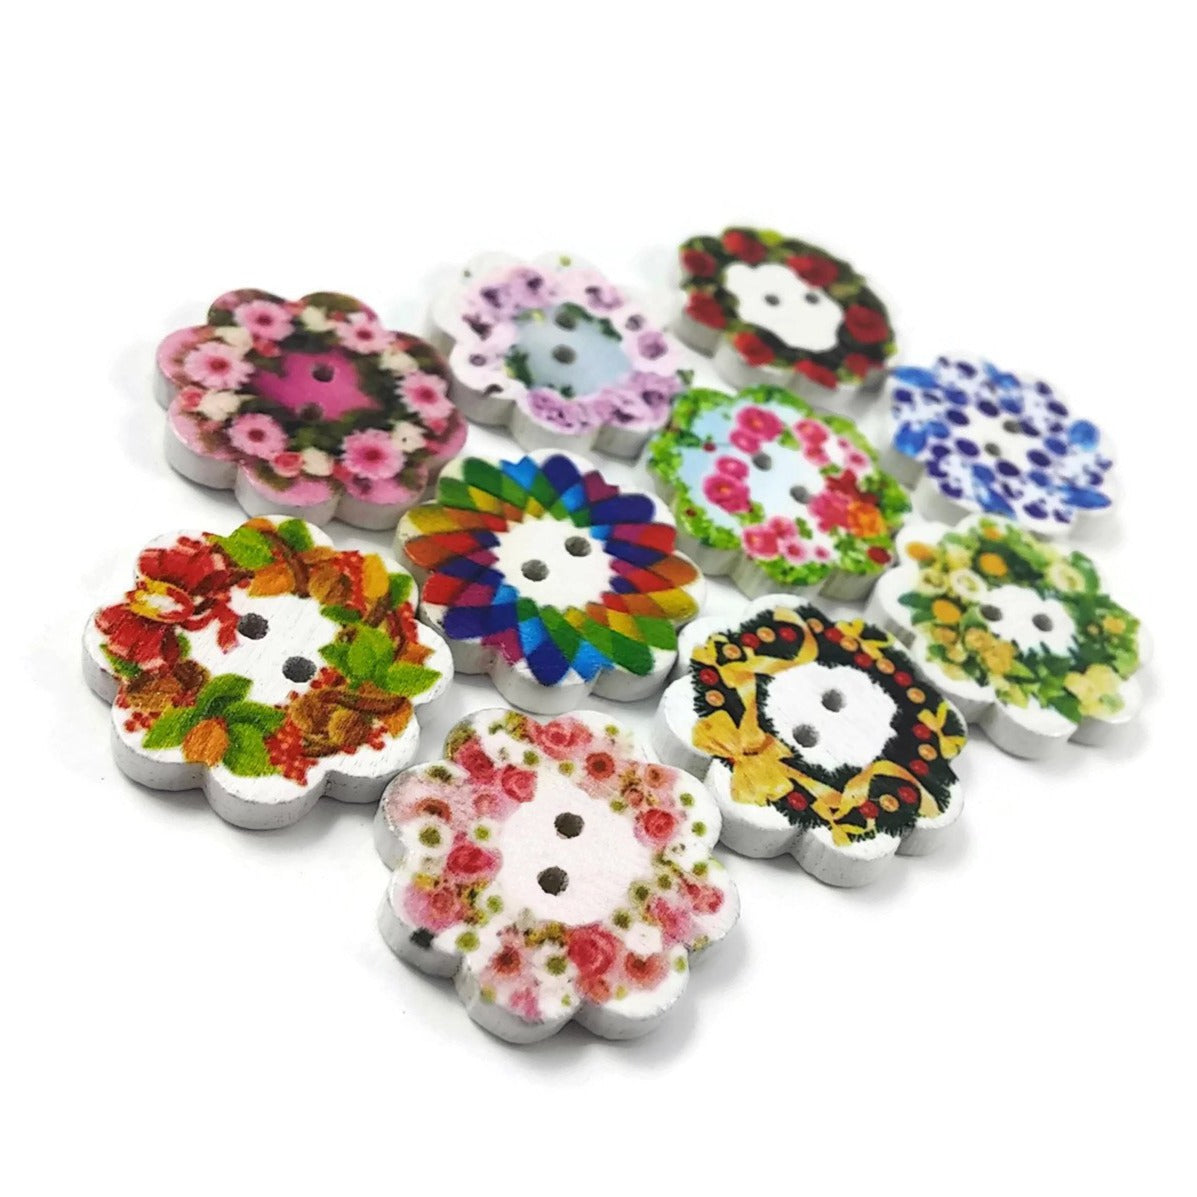 Flowers wood sewing buttons - 10 Mixed Patterns craft buttons 19mm